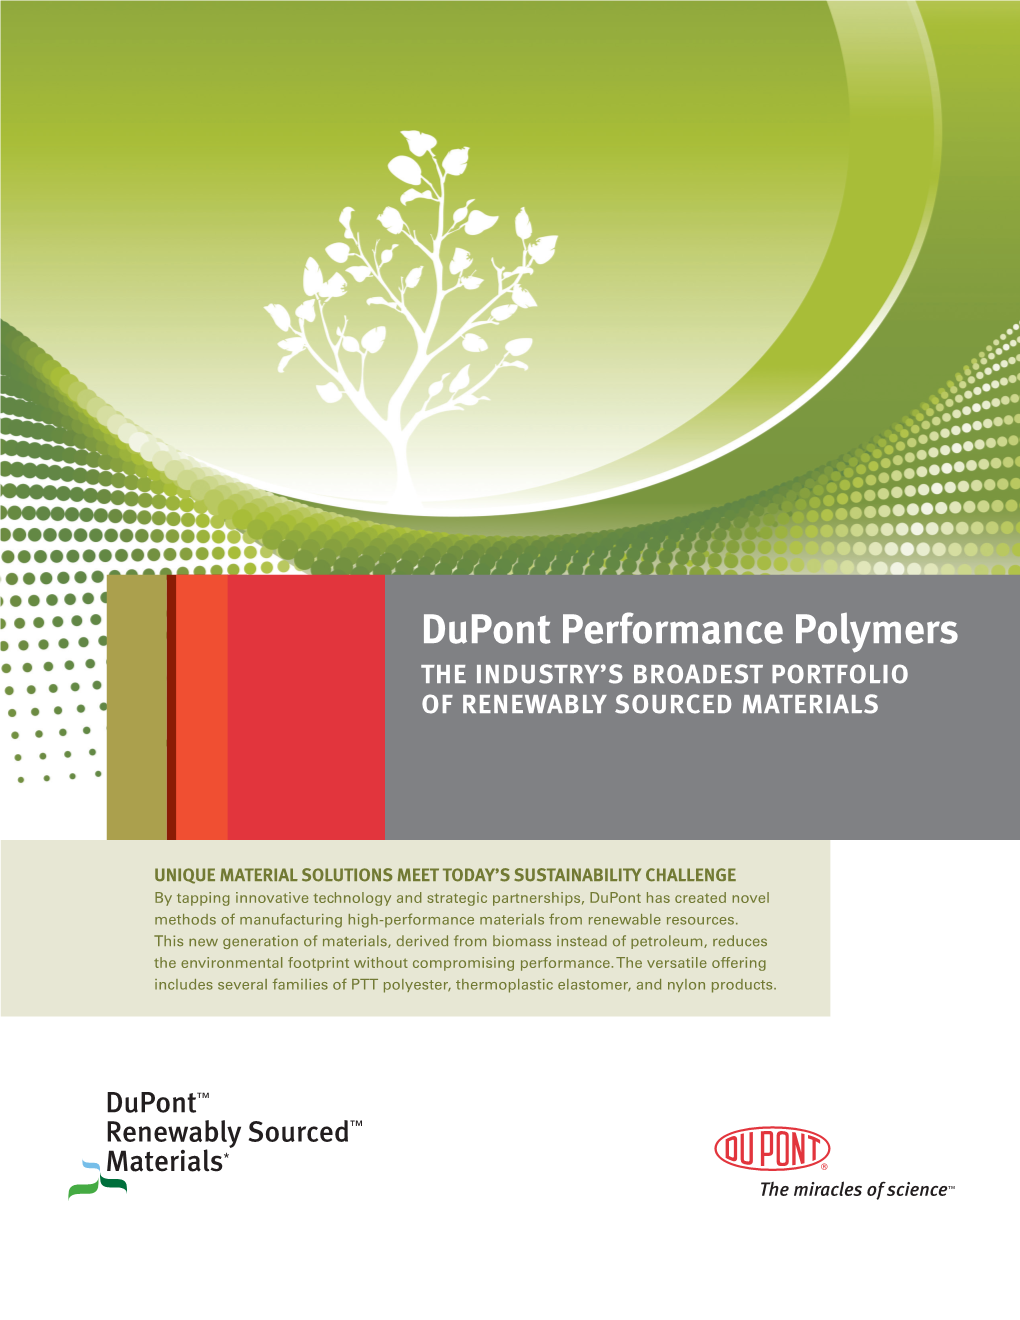 Dupont Performance Polymers the INDUSTRY’S BROADEST PORTFOLIO of RENEWABLY SOURCED MATERIALS